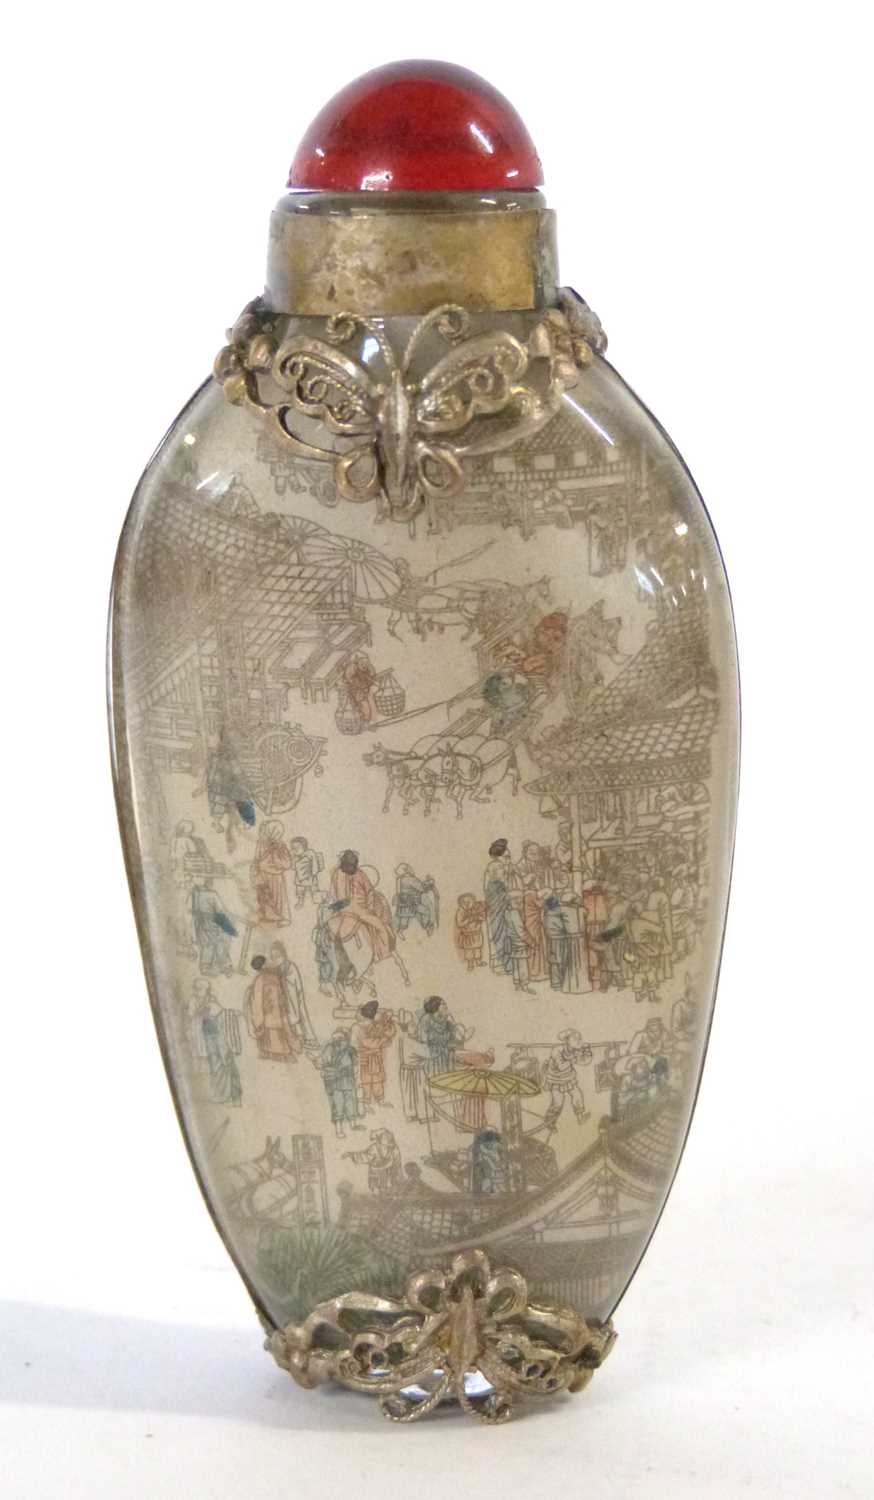 Antique Chinese reverse-painted snuff bottle with hardstone stopper and decorated with intricate - Image 3 of 8